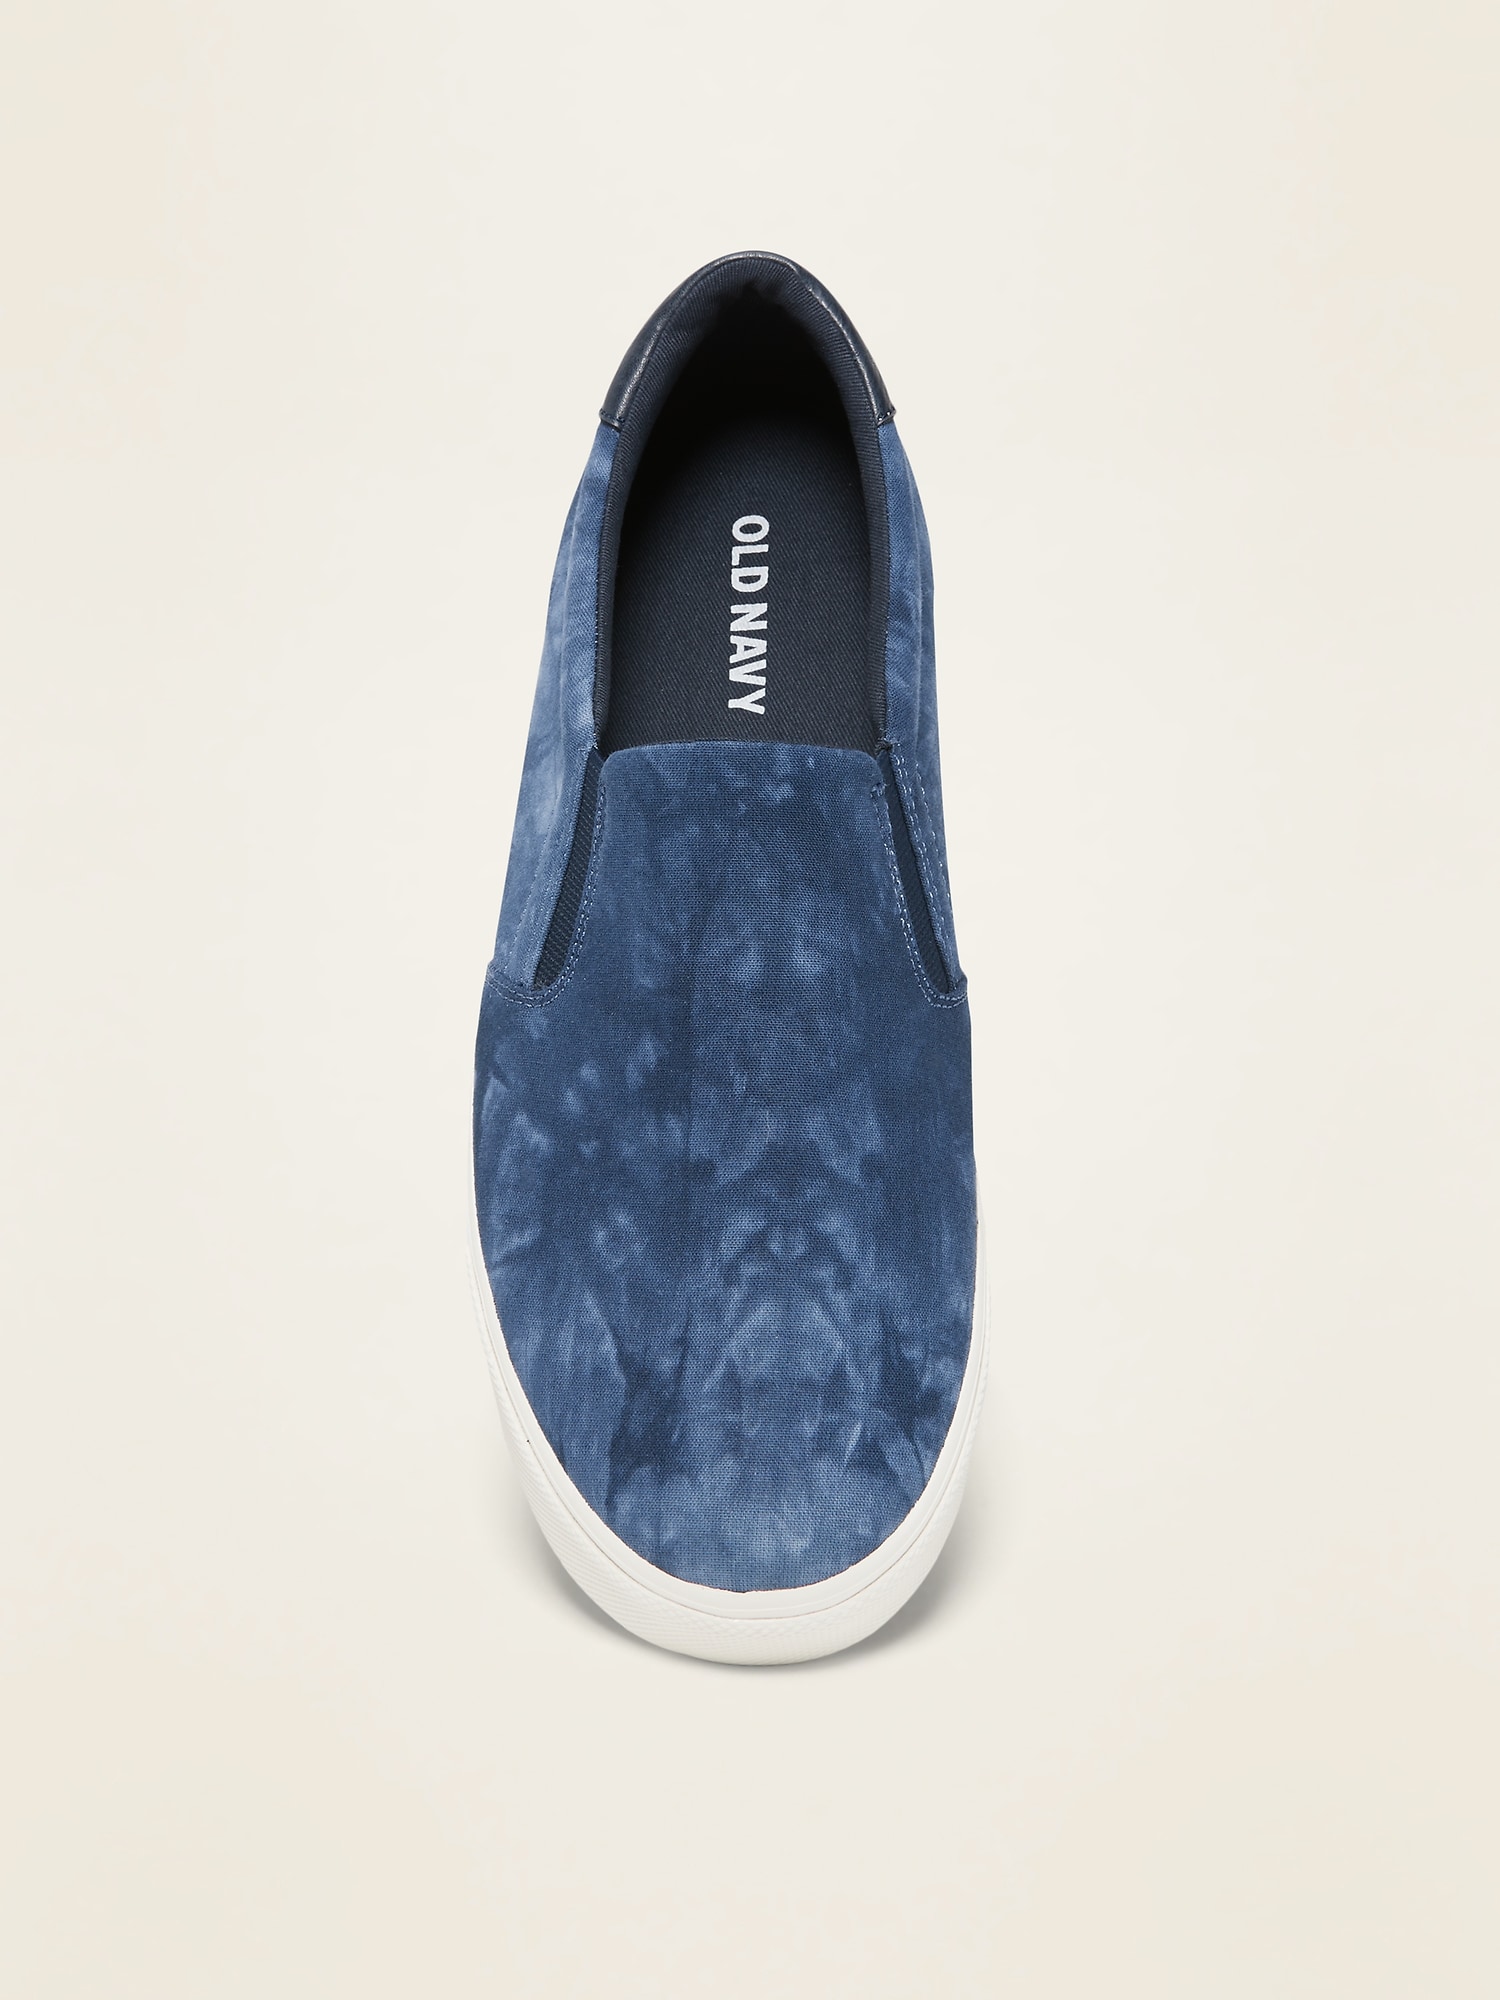 slip on shoes old navy